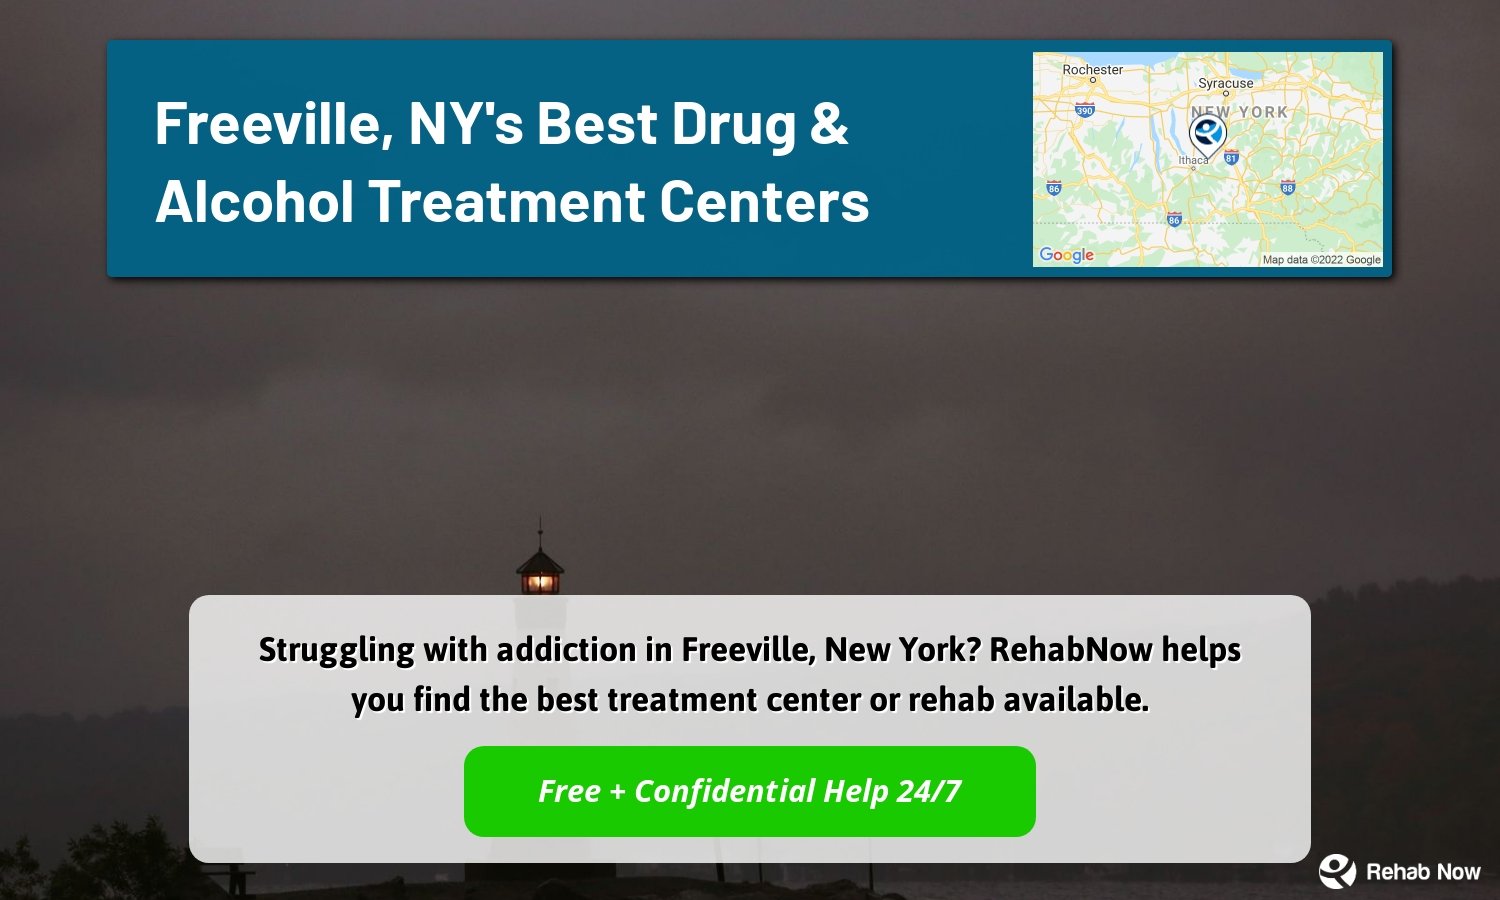 Struggling with addiction in Freeville, New York? RehabNow helps you find the best treatment center or rehab available.